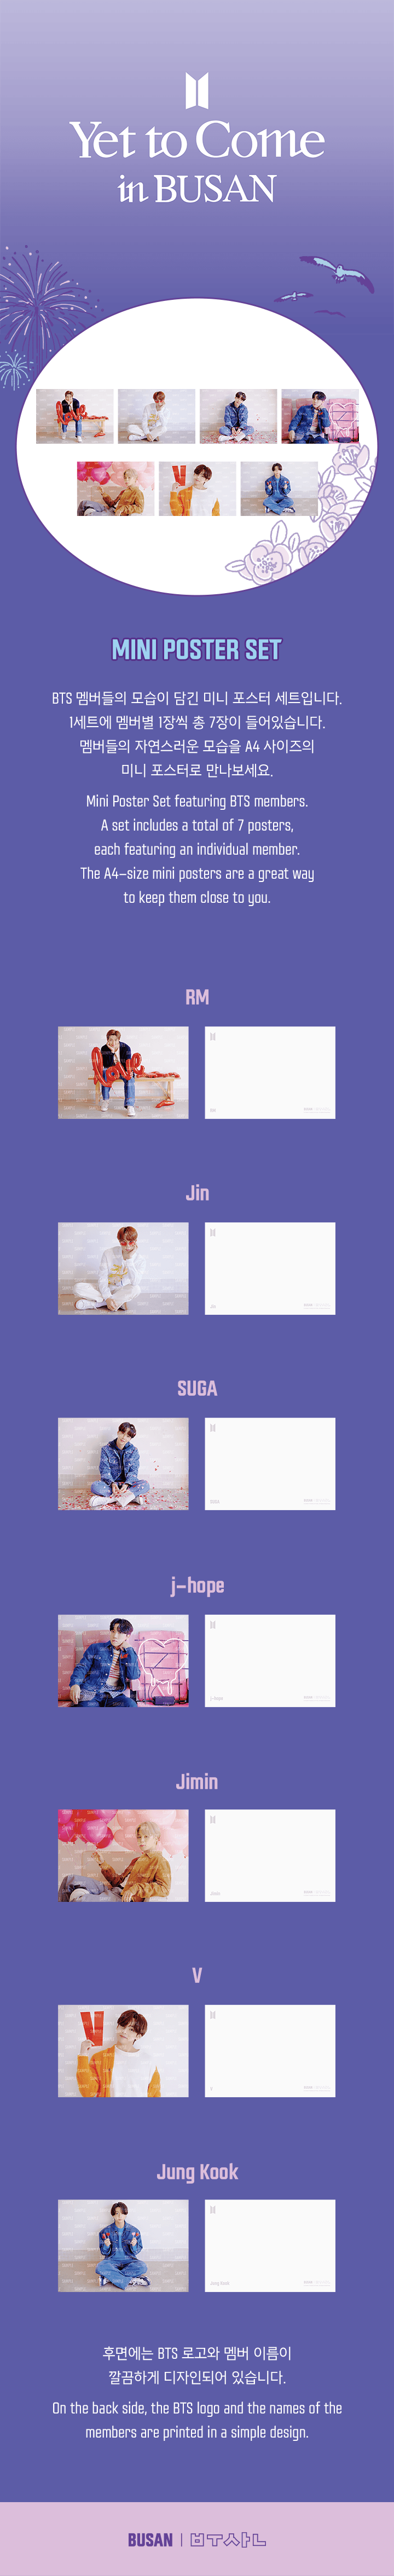 BTS [Yet To Come] Mini Poster Set